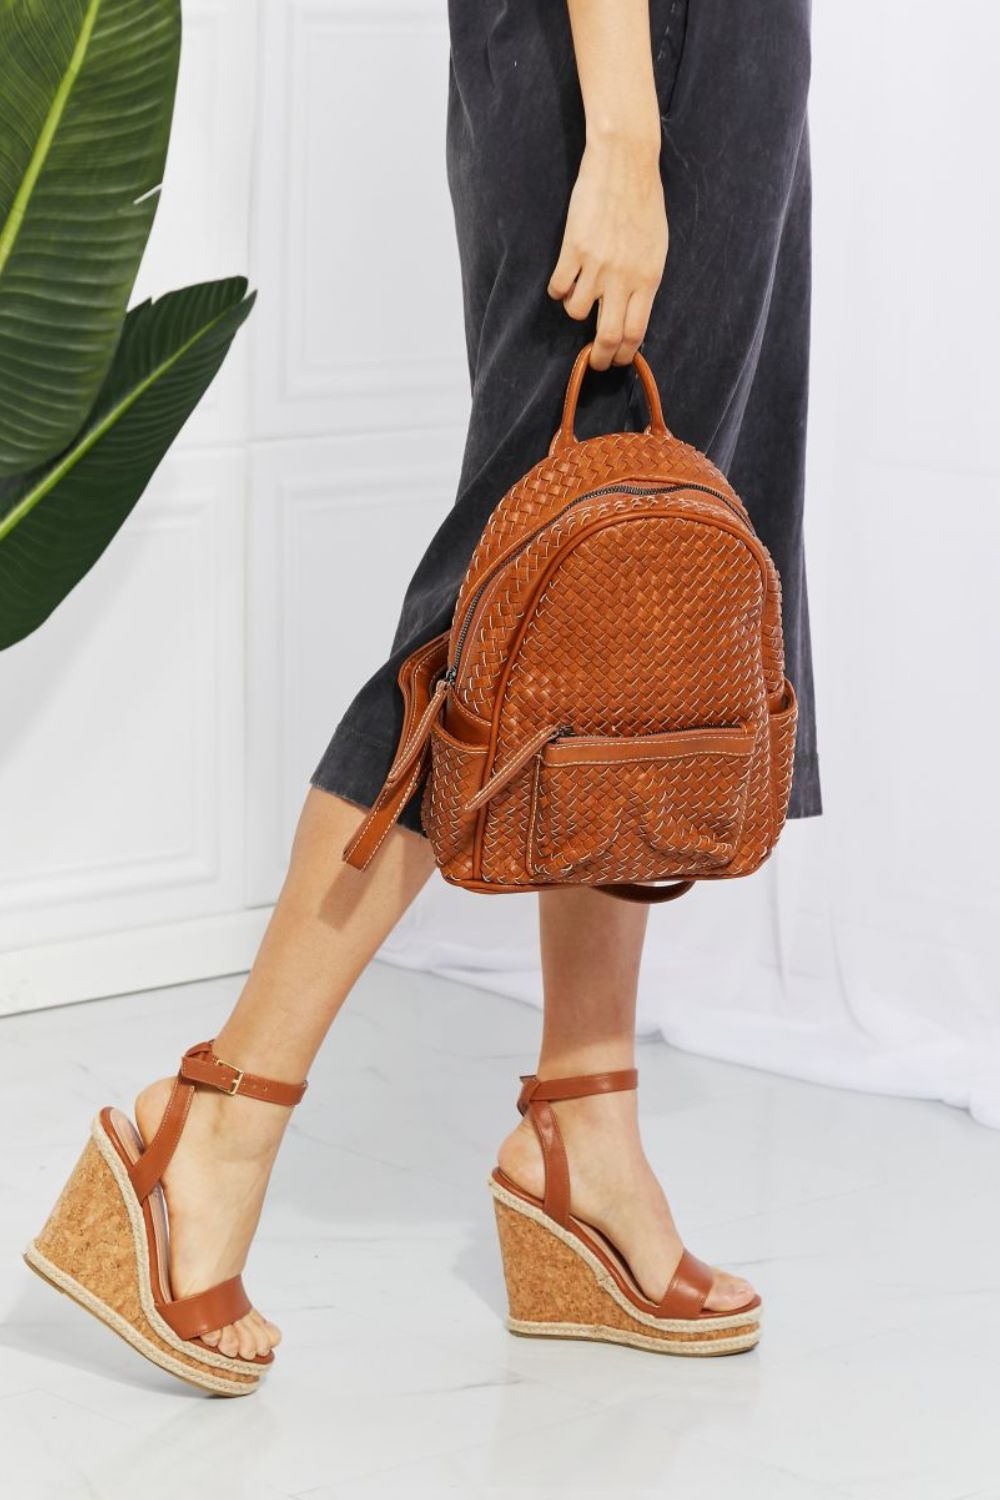 SHOMICO Certainly Chic Faux Leather Woven Backpack - Guy Christopher